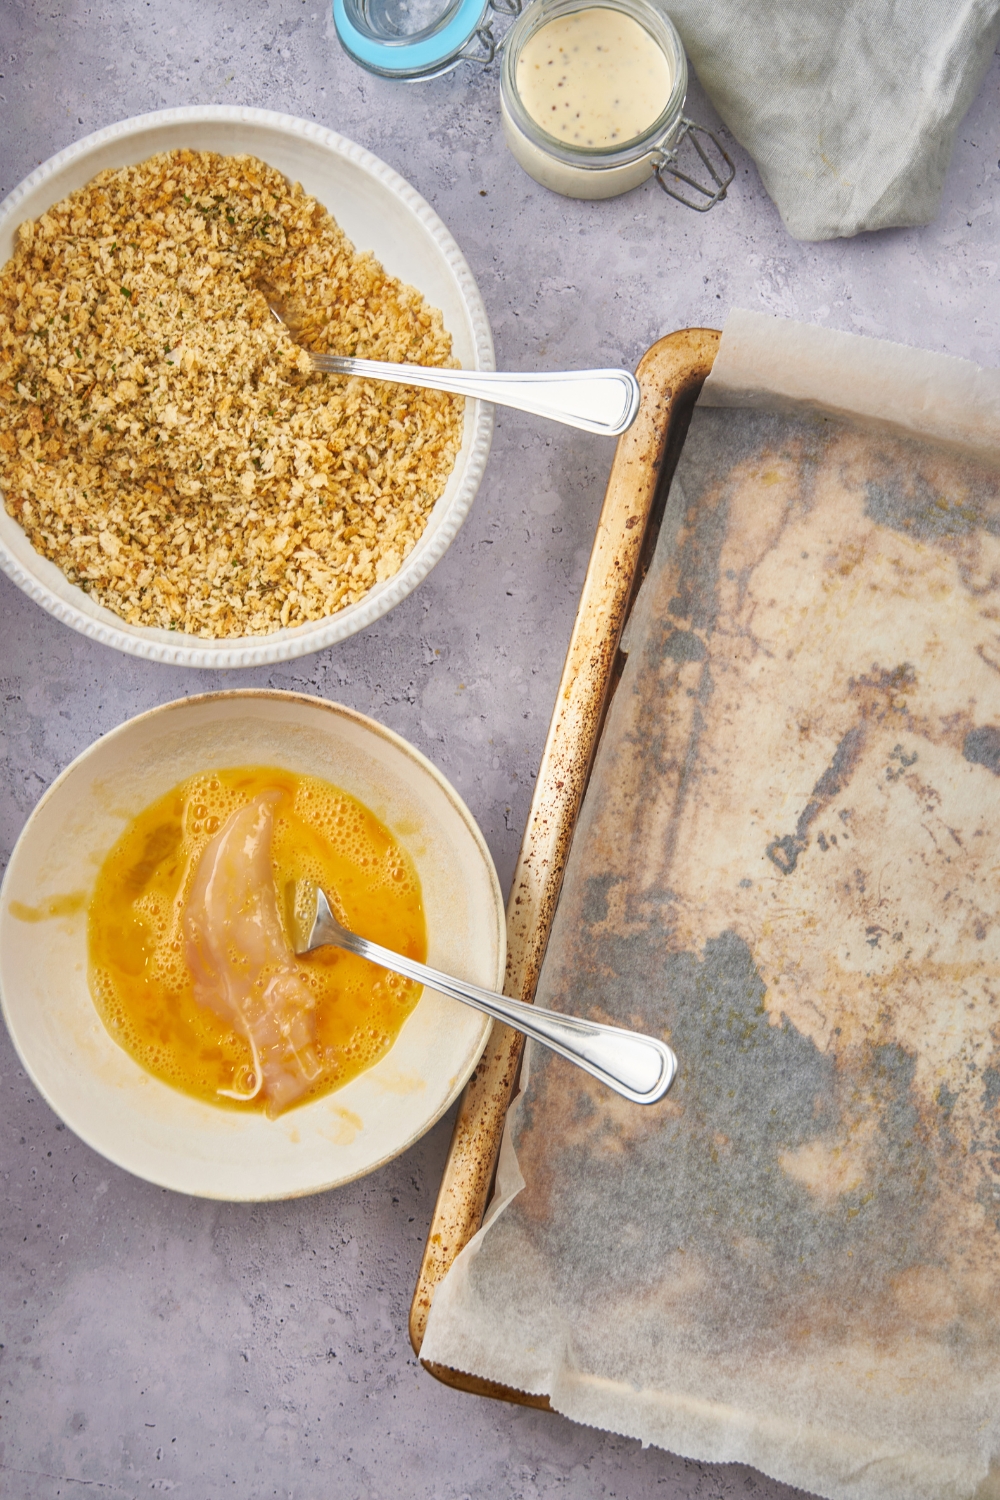 Overhead view of a bowl of panko bread crumbs, a bowl of beaten egg with a chicken tender in it, and a baking sheet lined with parchment paper.